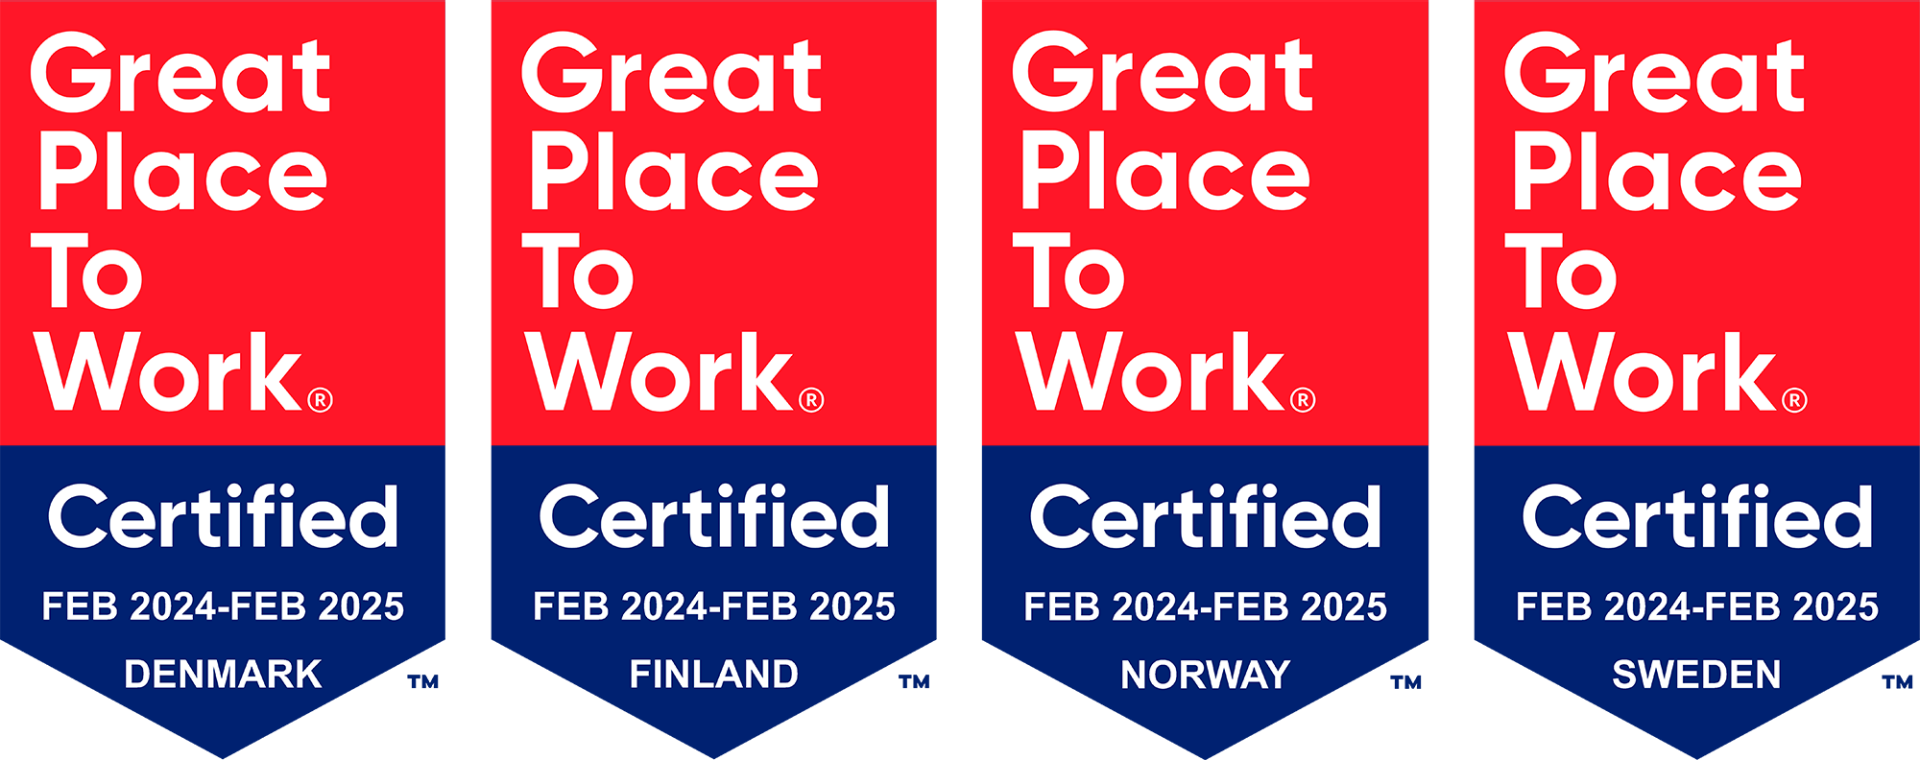 Great Place To Work Certificates